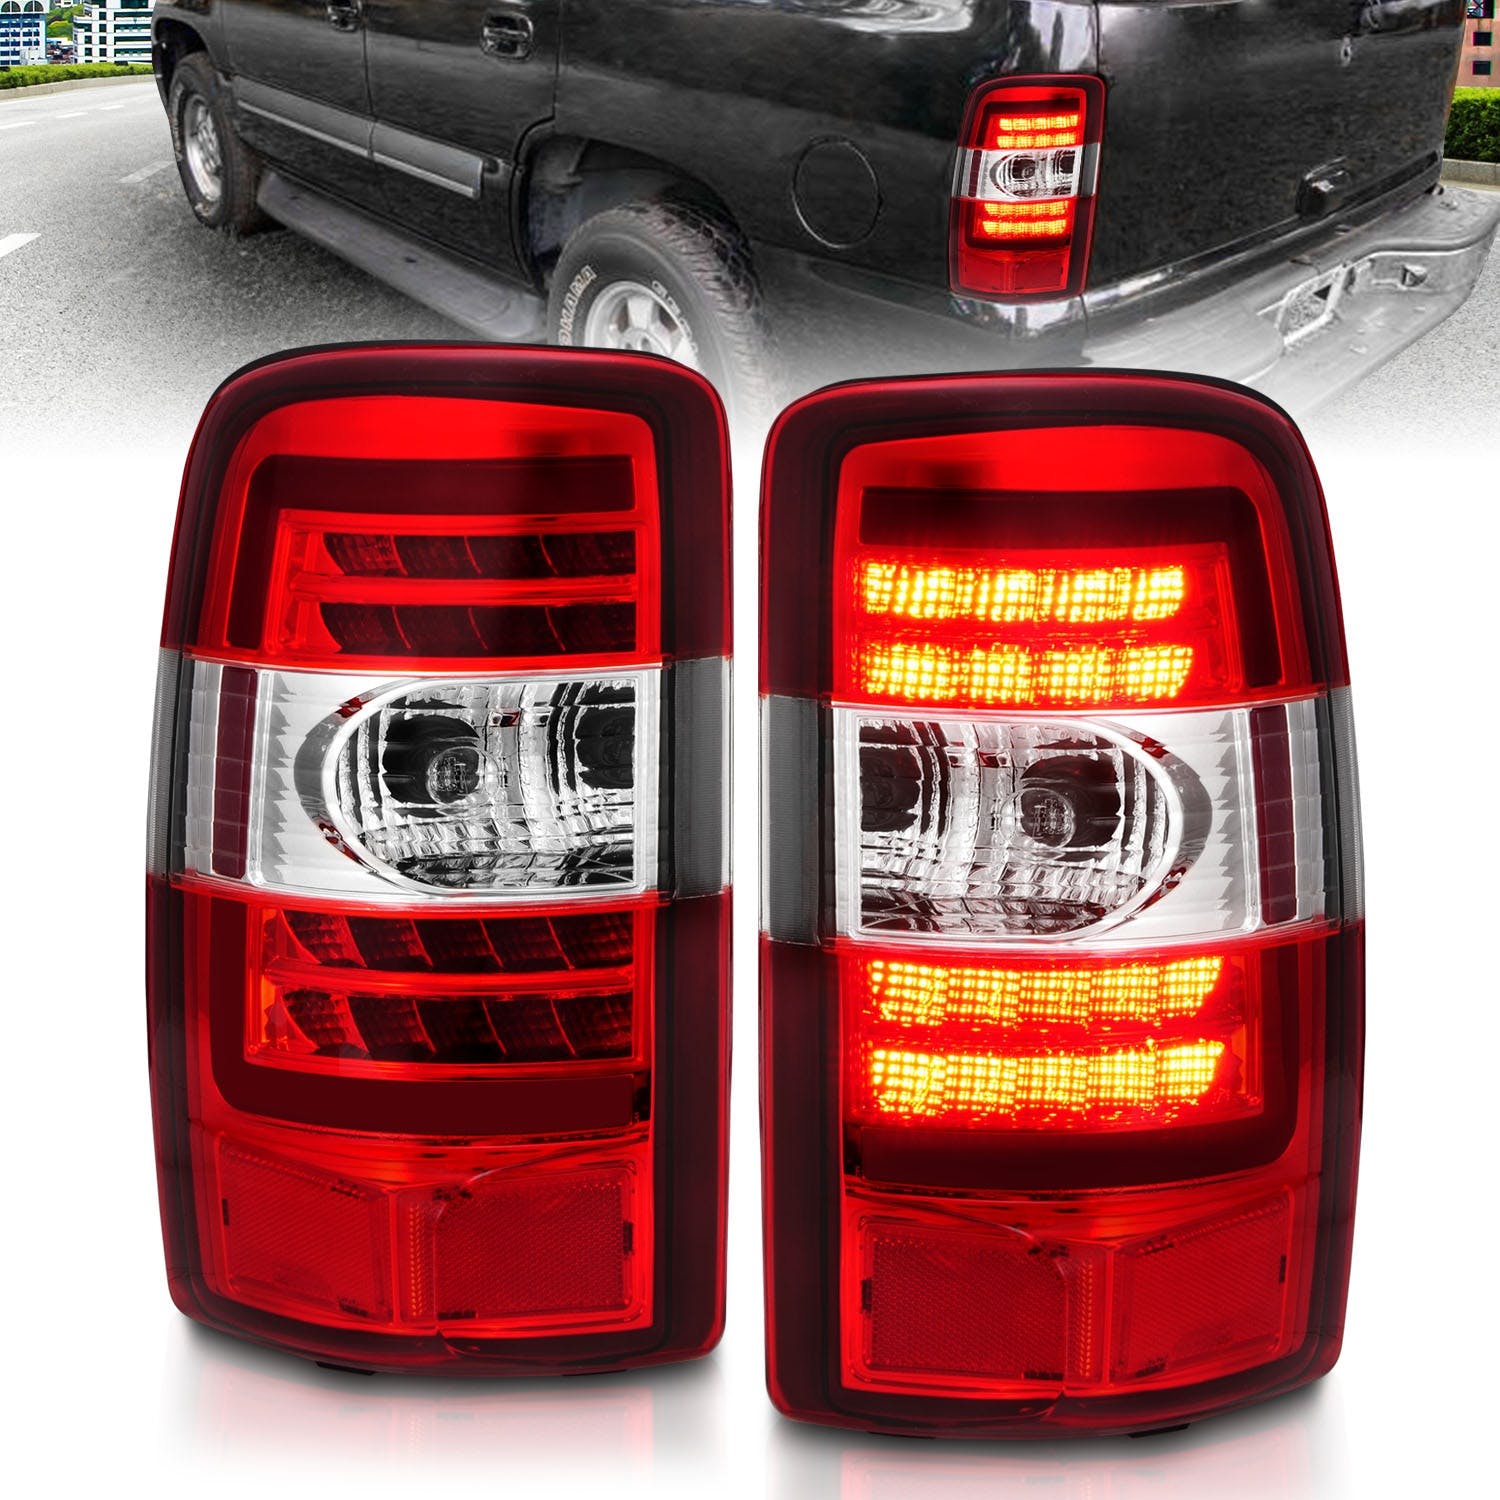 AnzoUSA 311364 LED Tail Light with Red Lens Chrome Housing